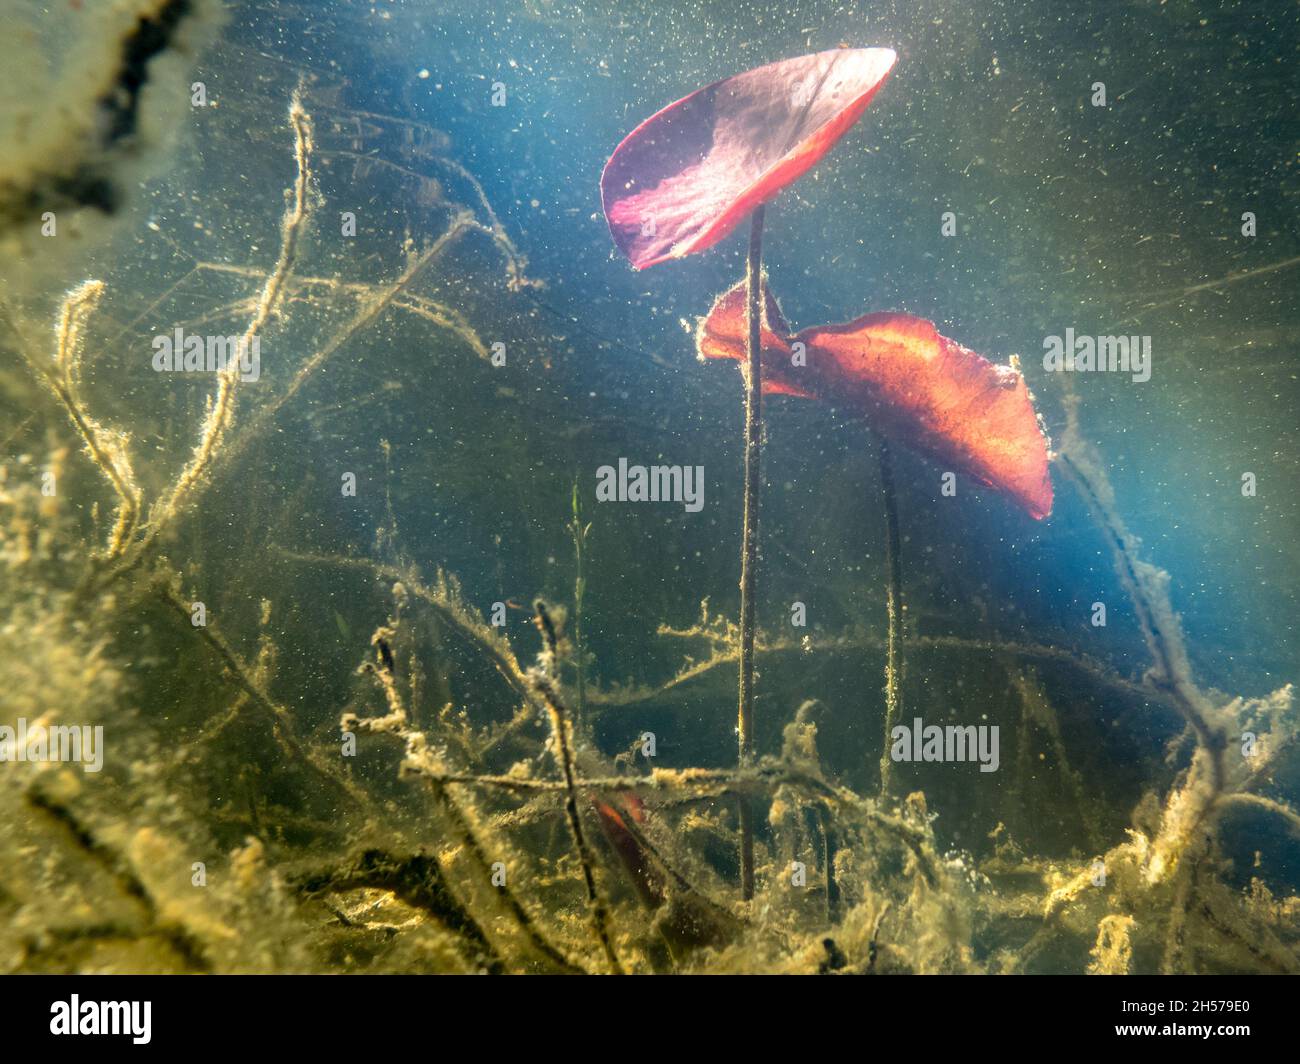 Red leaves of water lily water plant growing towards surface Stock Photo